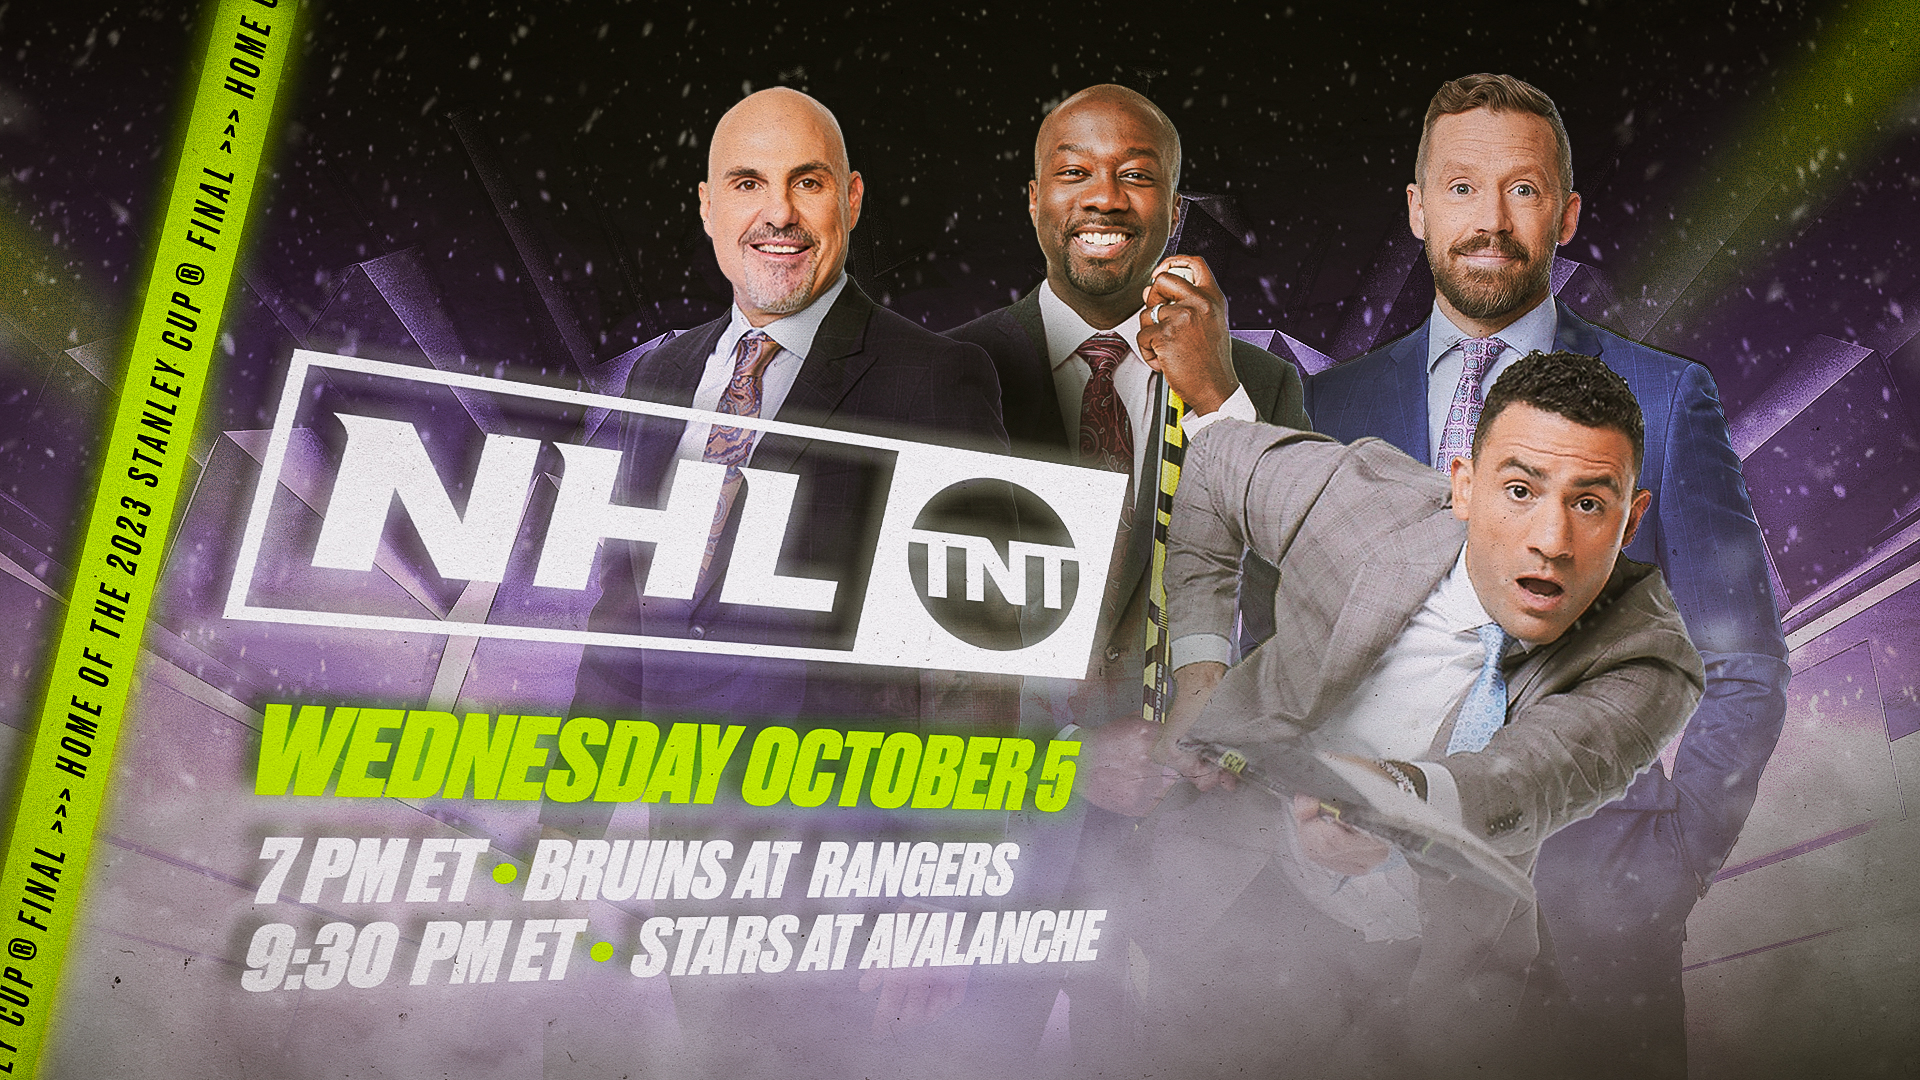 NHL on TNT's Paul Bissonnette's Pick to Win the Stanley Cup Is ….?